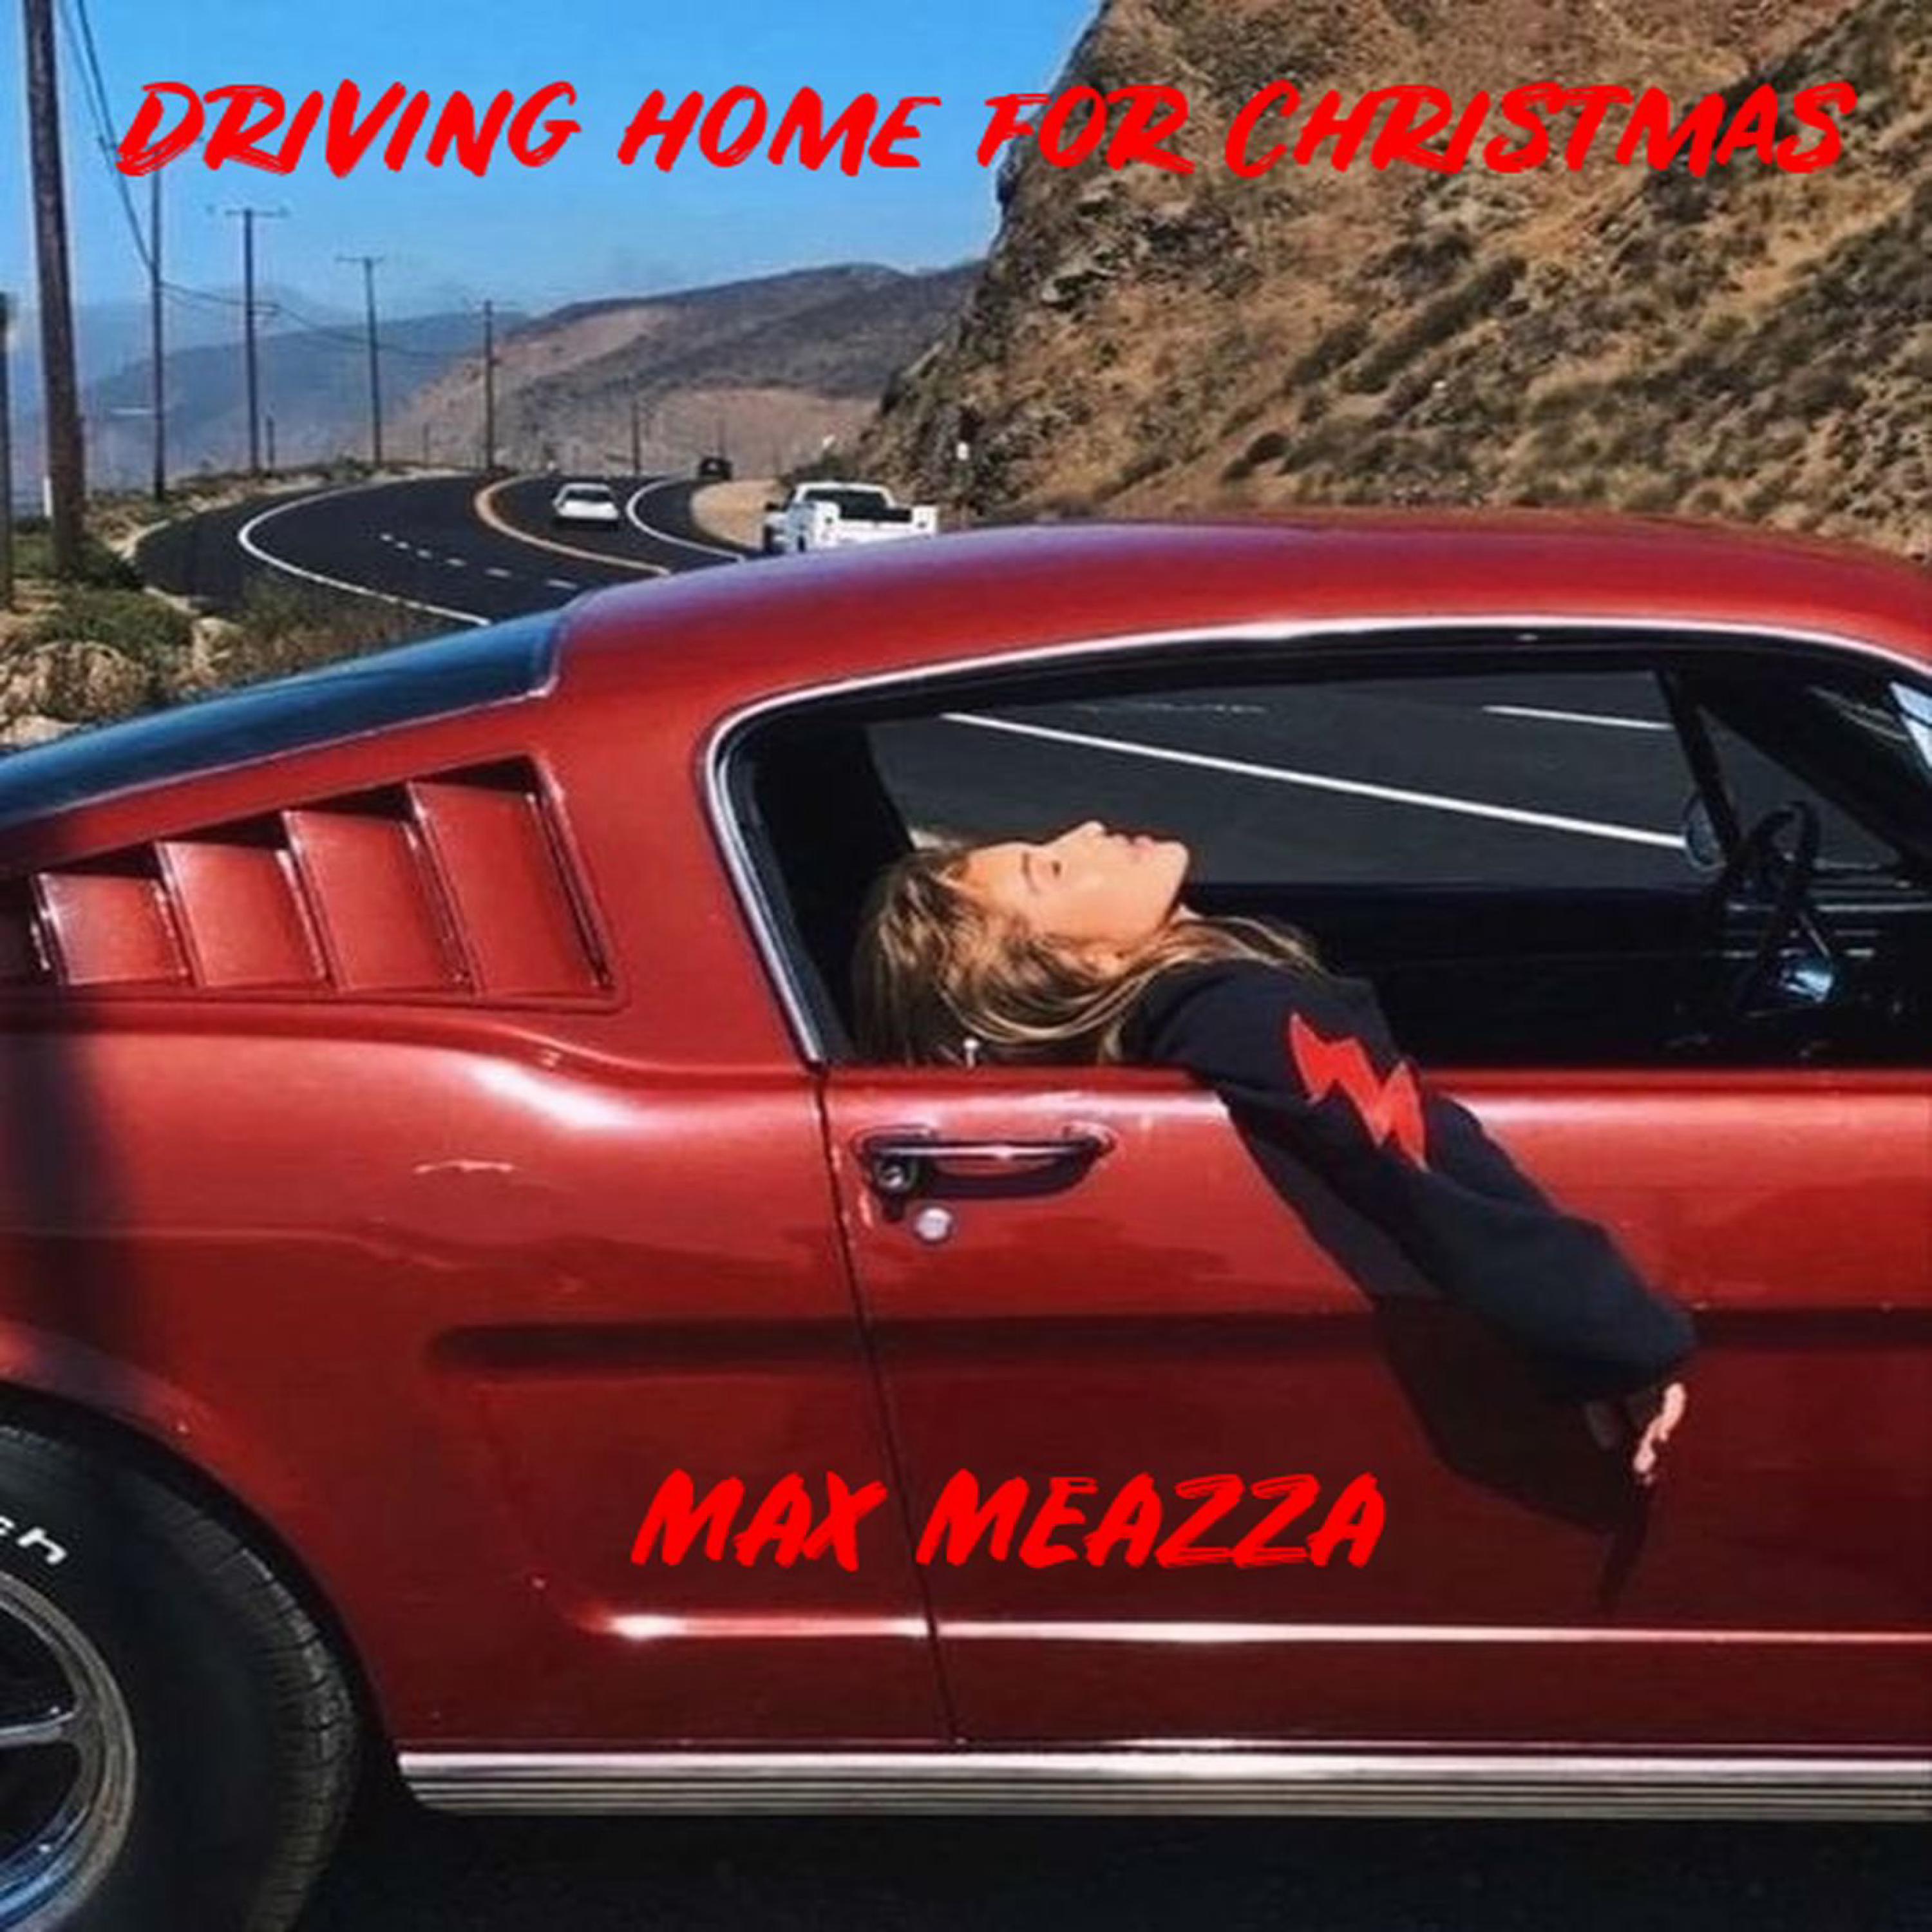 Max Meazza - Driving home for Christmas